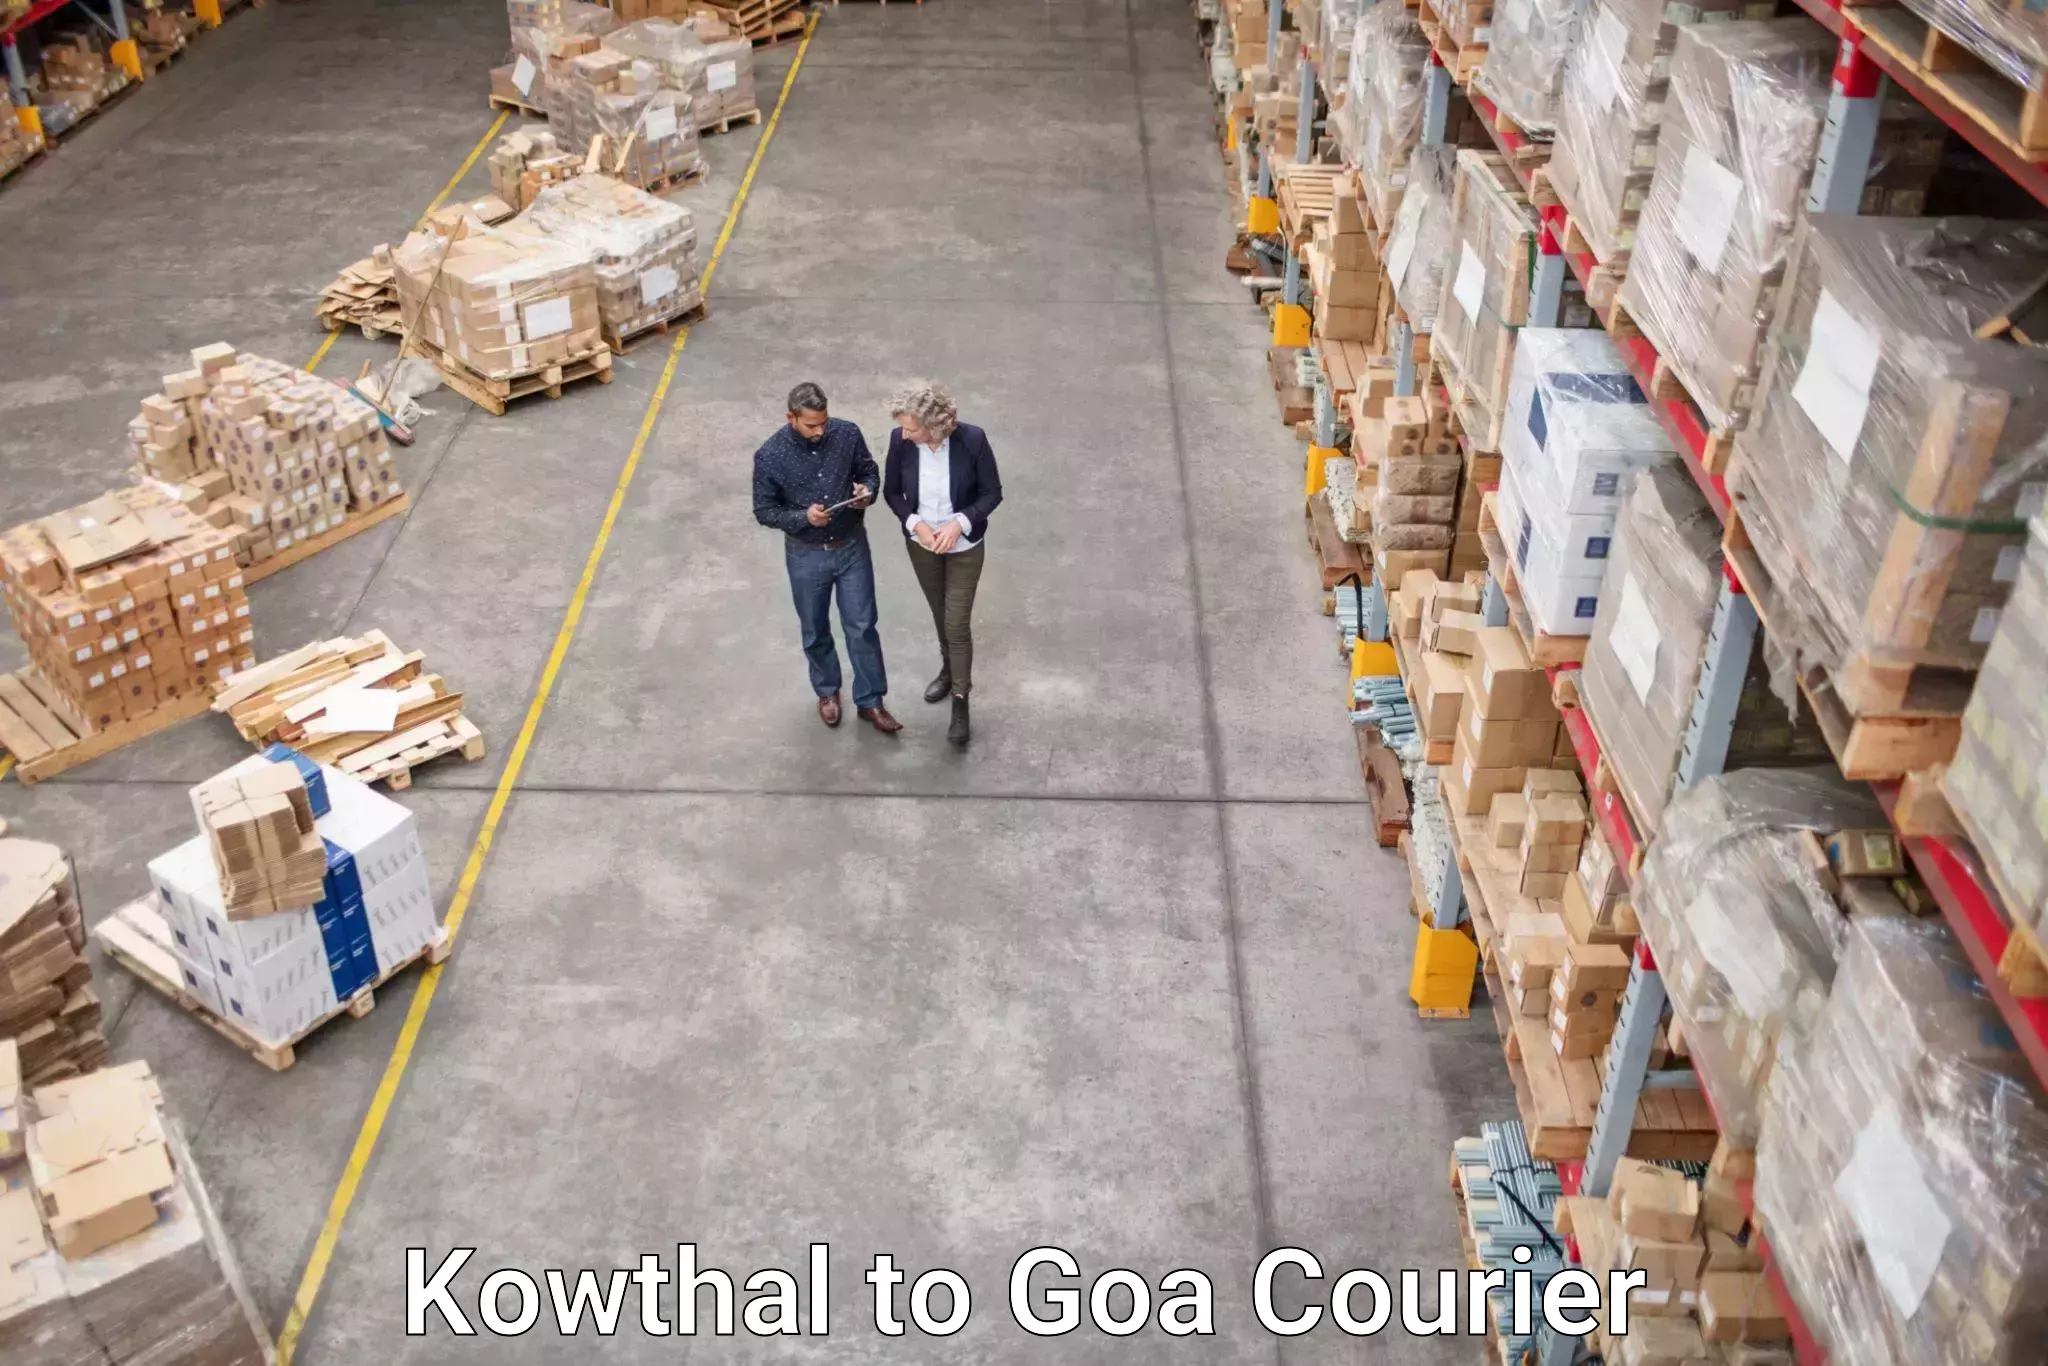 Reliable courier service in Kowthal to Ponda